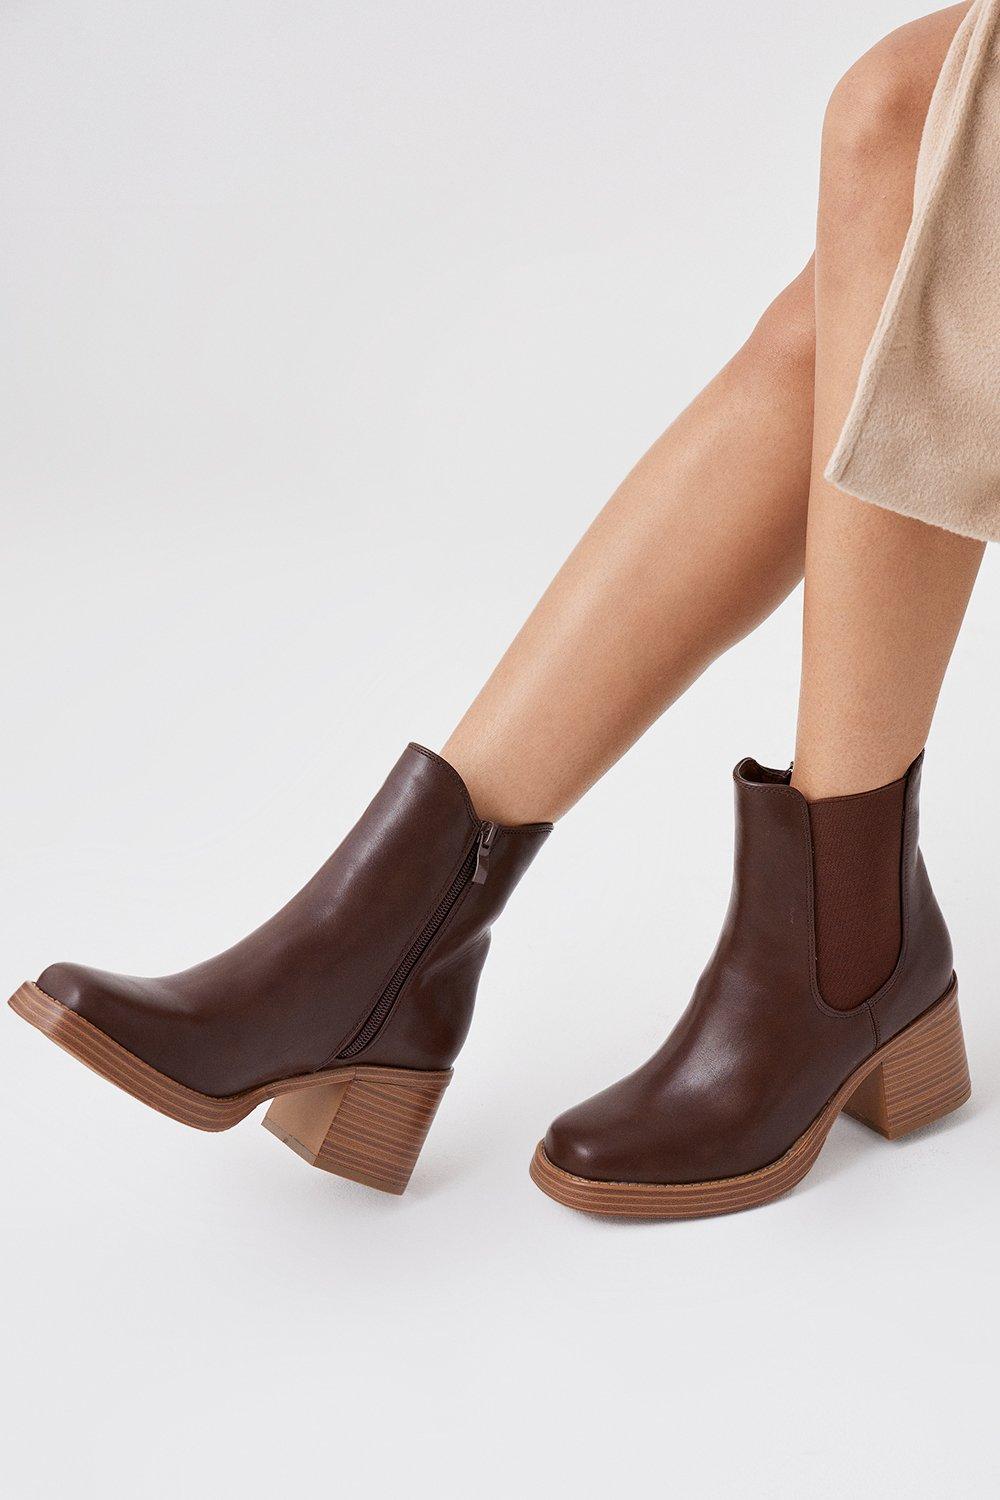 Women’s Faith: Alberta Square Toe Stack Heel Ankle Boots - brown - 3